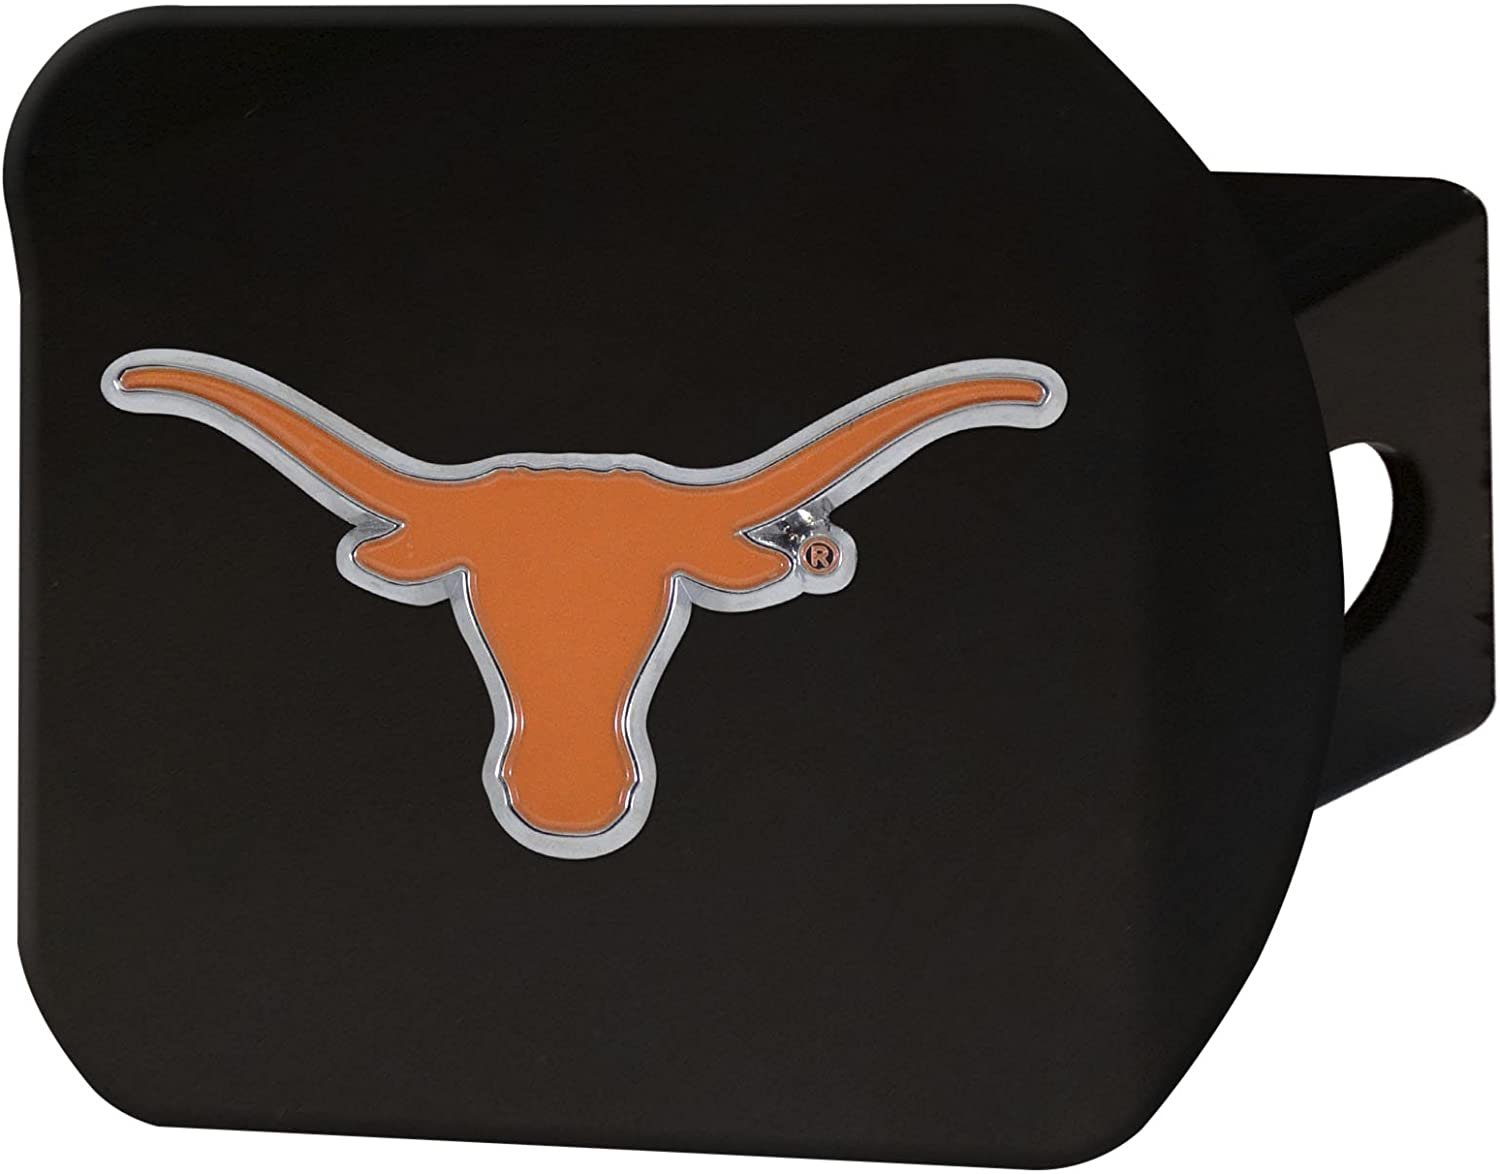 Texas Longhorns Solid Metal Black Hitch Cover with Color Metal Emblem 2 Inch Square Type III University of